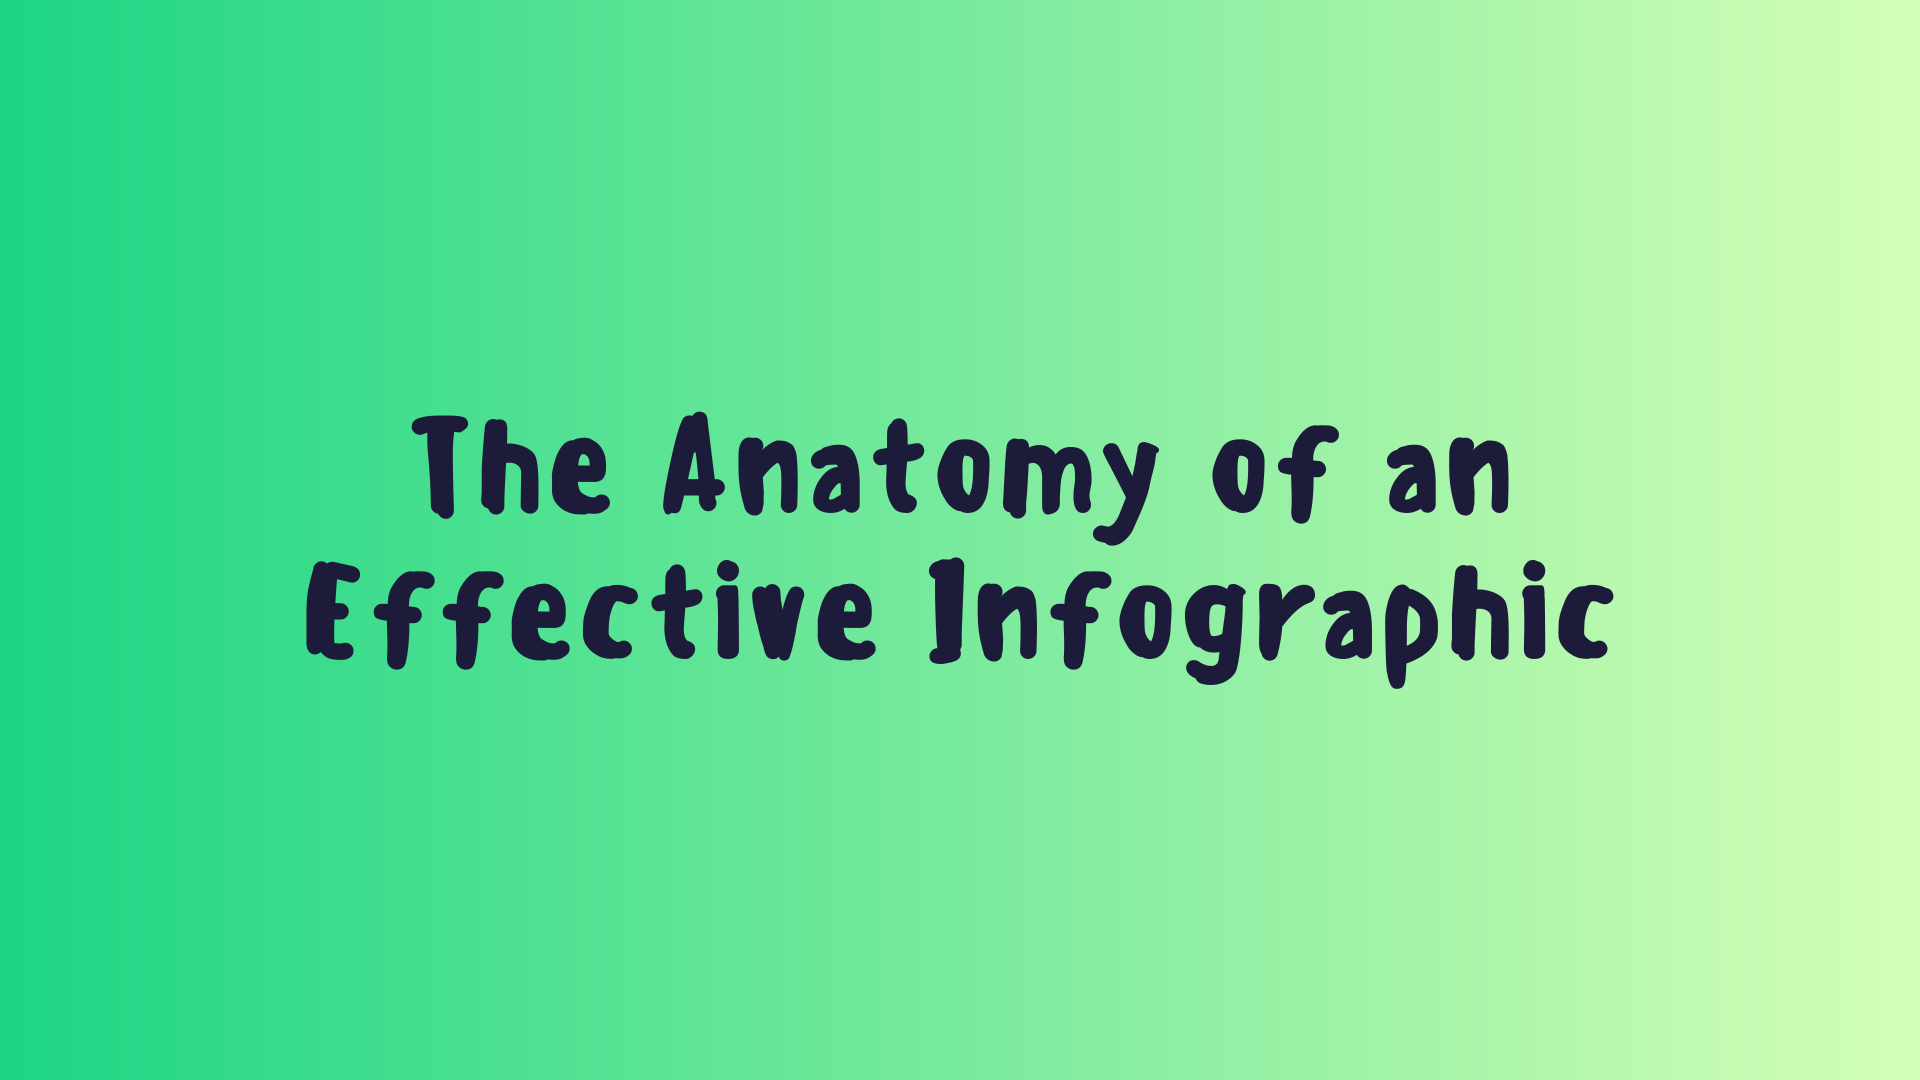 The Anatomy of an Effective Infographic